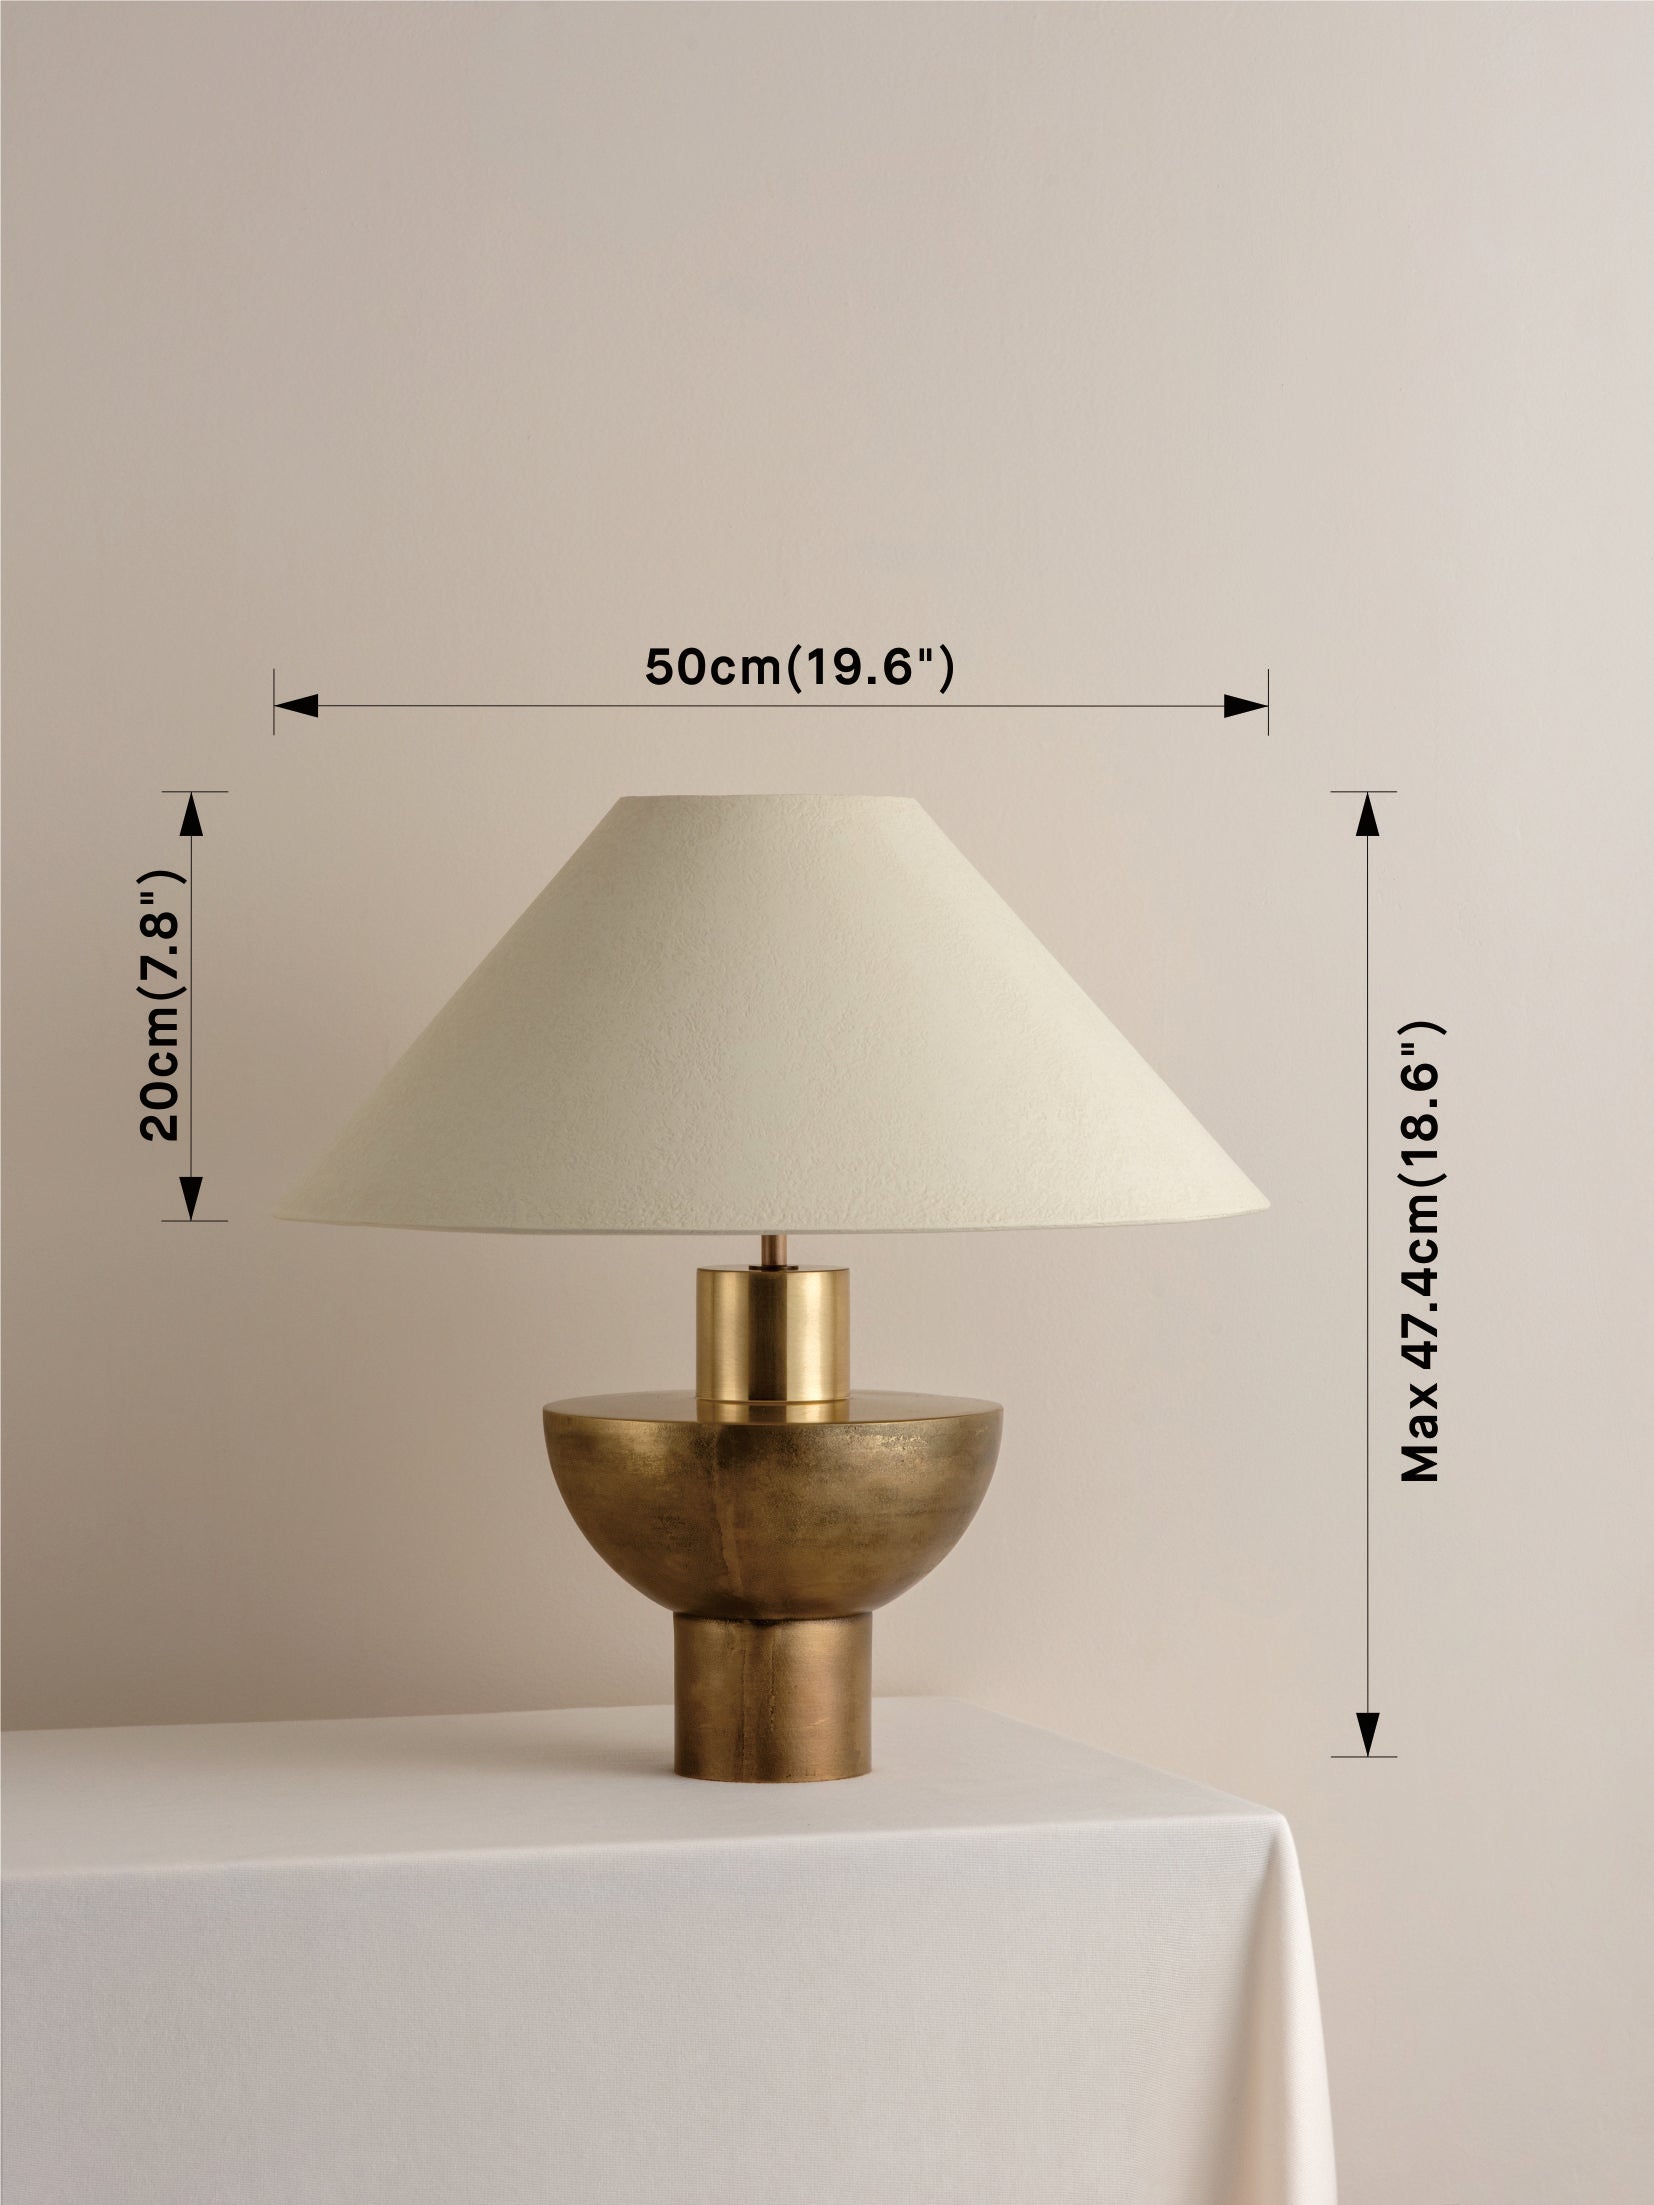 Editions brass lamp with + plaster shade | Table Lamp | Lights & Lamps | UK | Modern Affordable Designer Lighting